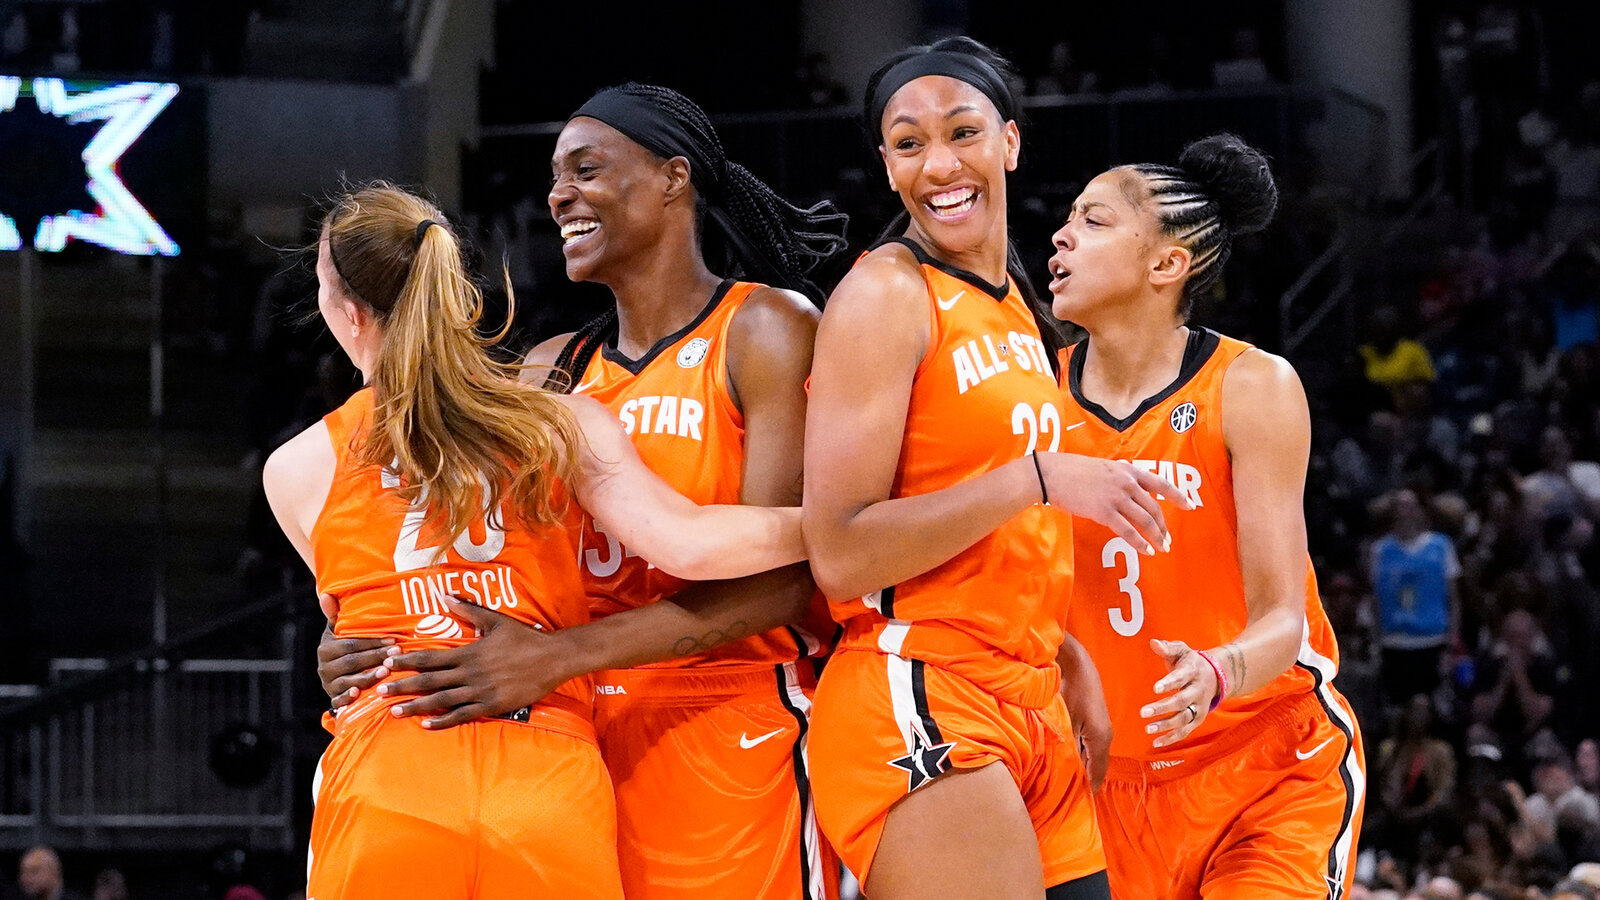 Pro Basketball Pay Clash The Shocking Salary Divide Between WNBA and NBA Stars in 2023--